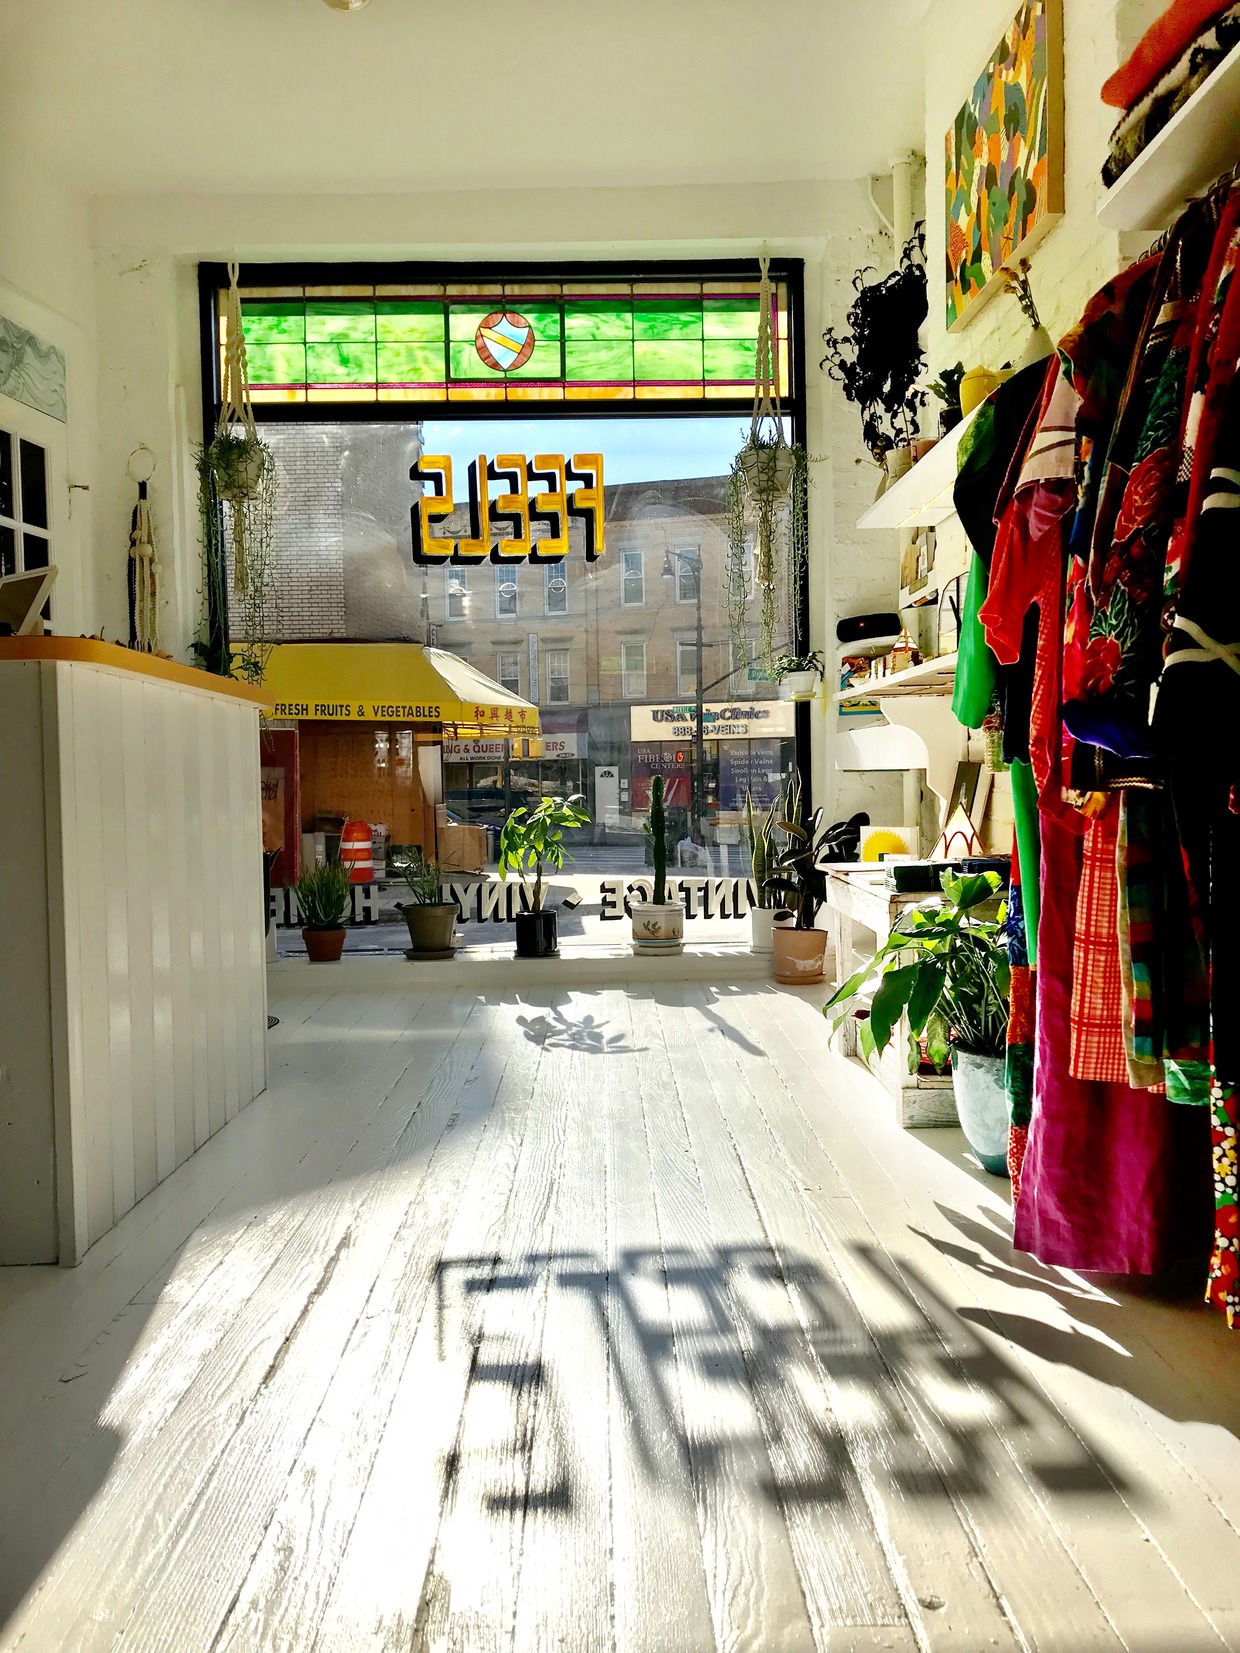 Ridgewood Welcomes New Concept Store With Everything from Vintage Clothing to Local Art